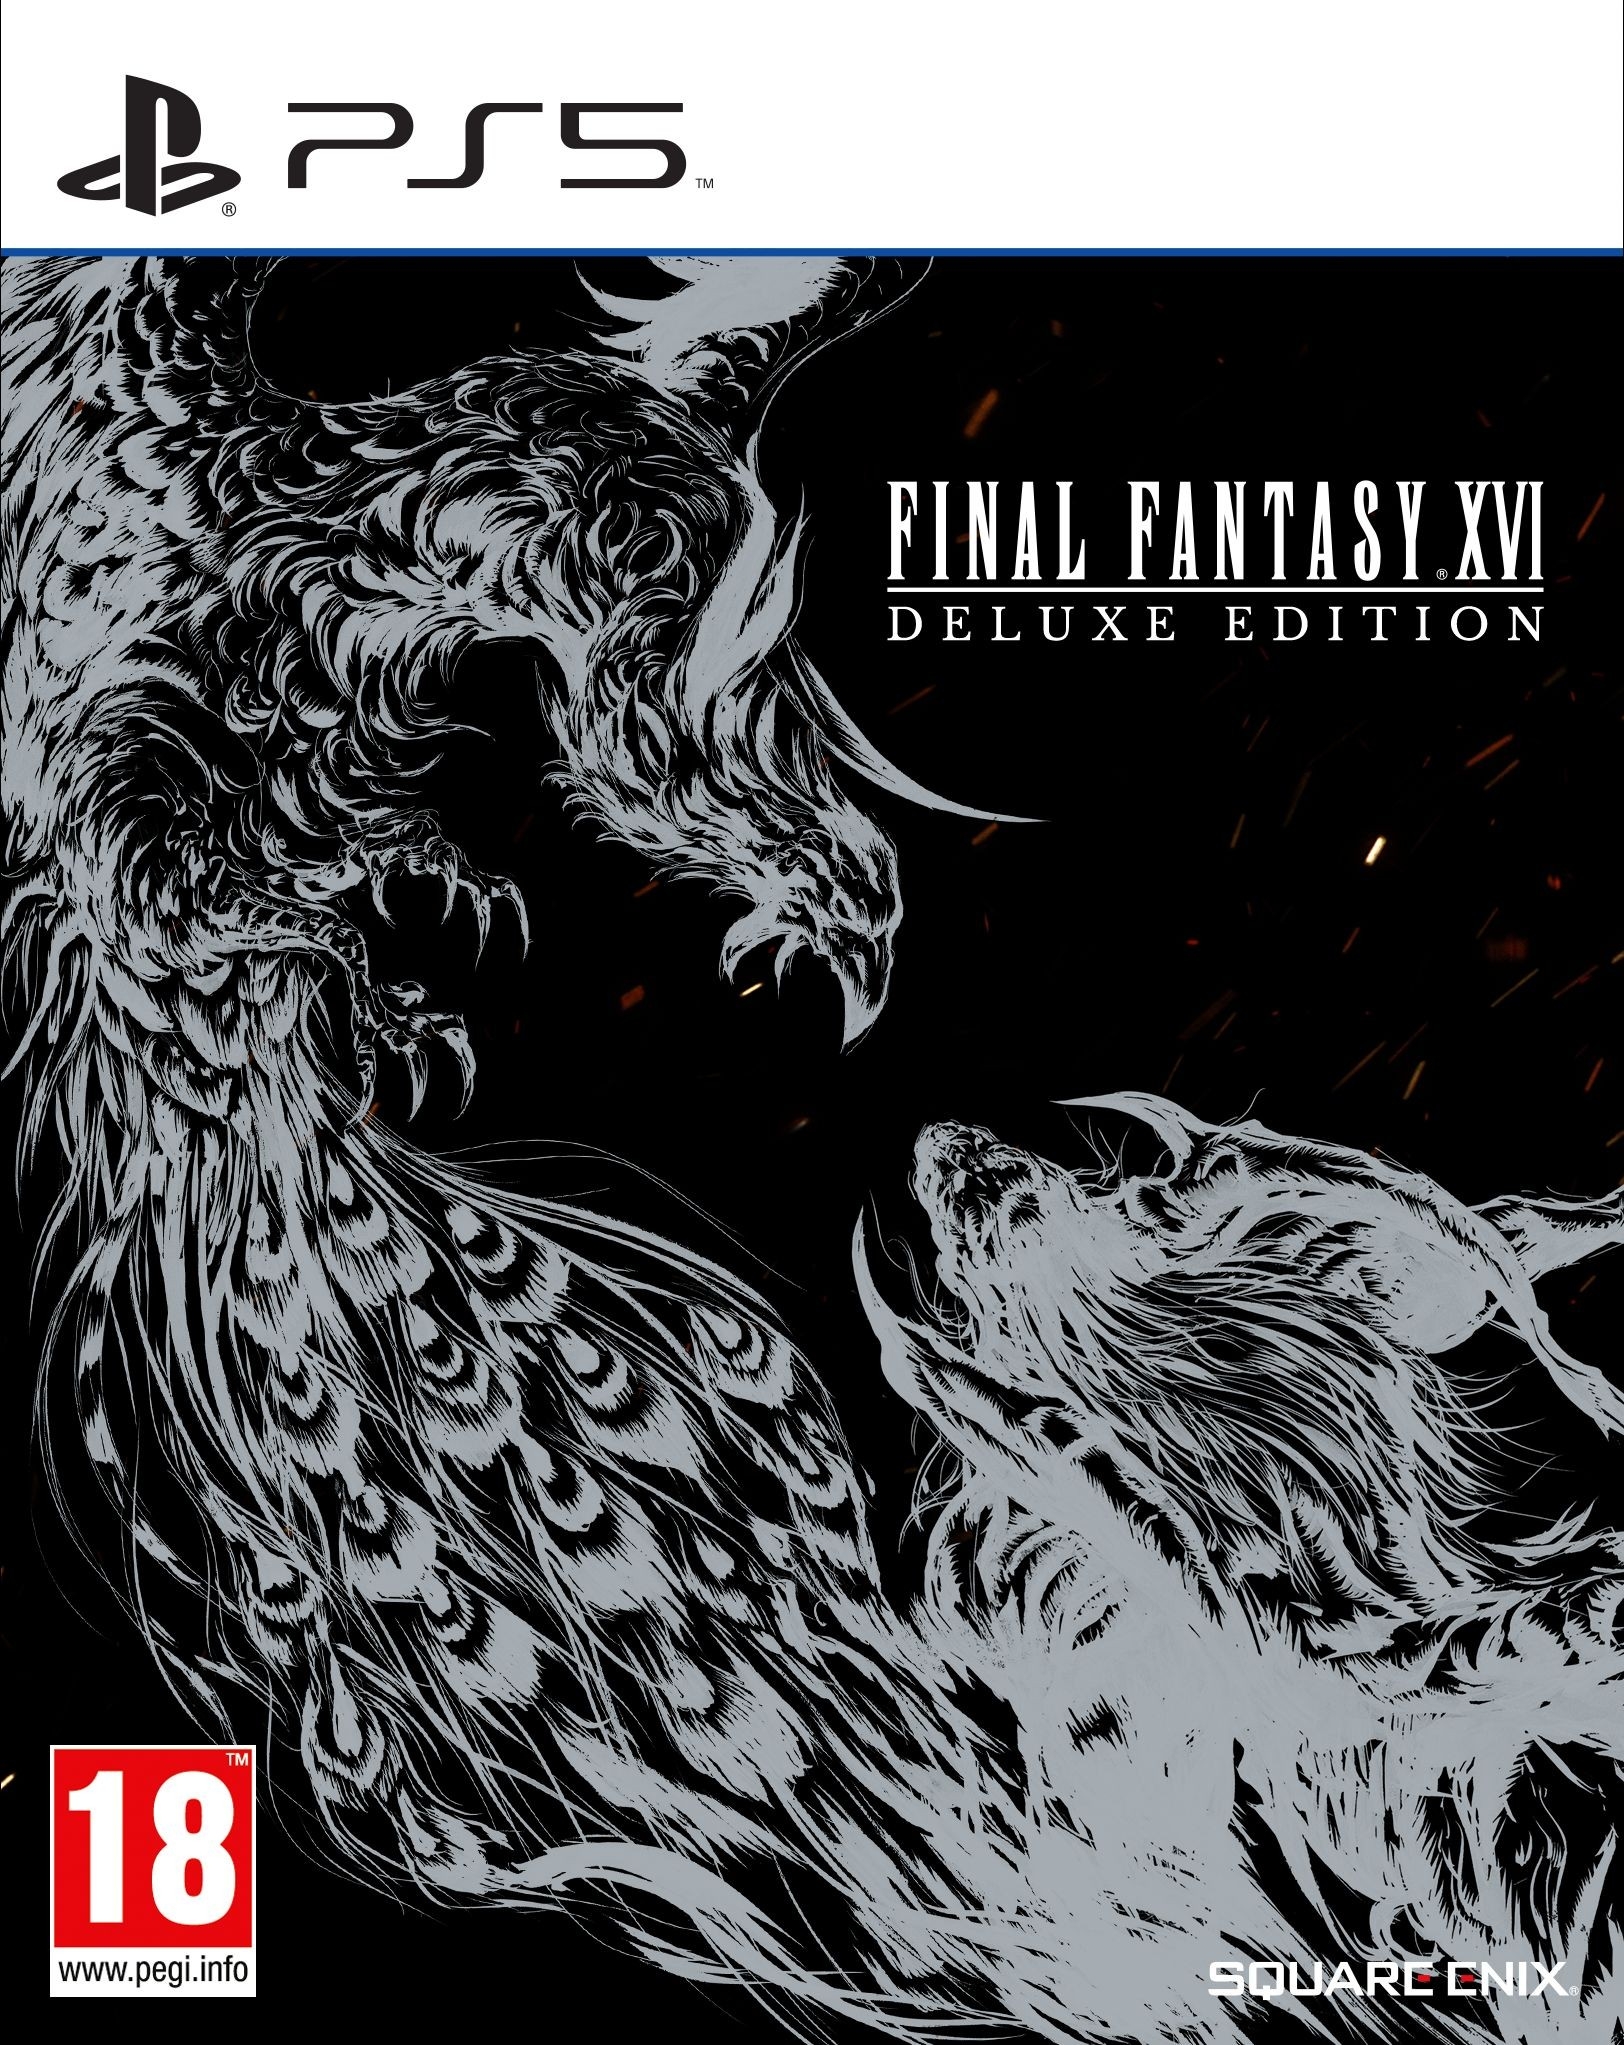 TGDB - Browse - Game - Final Fantasy XVI [Deluxe Edition]